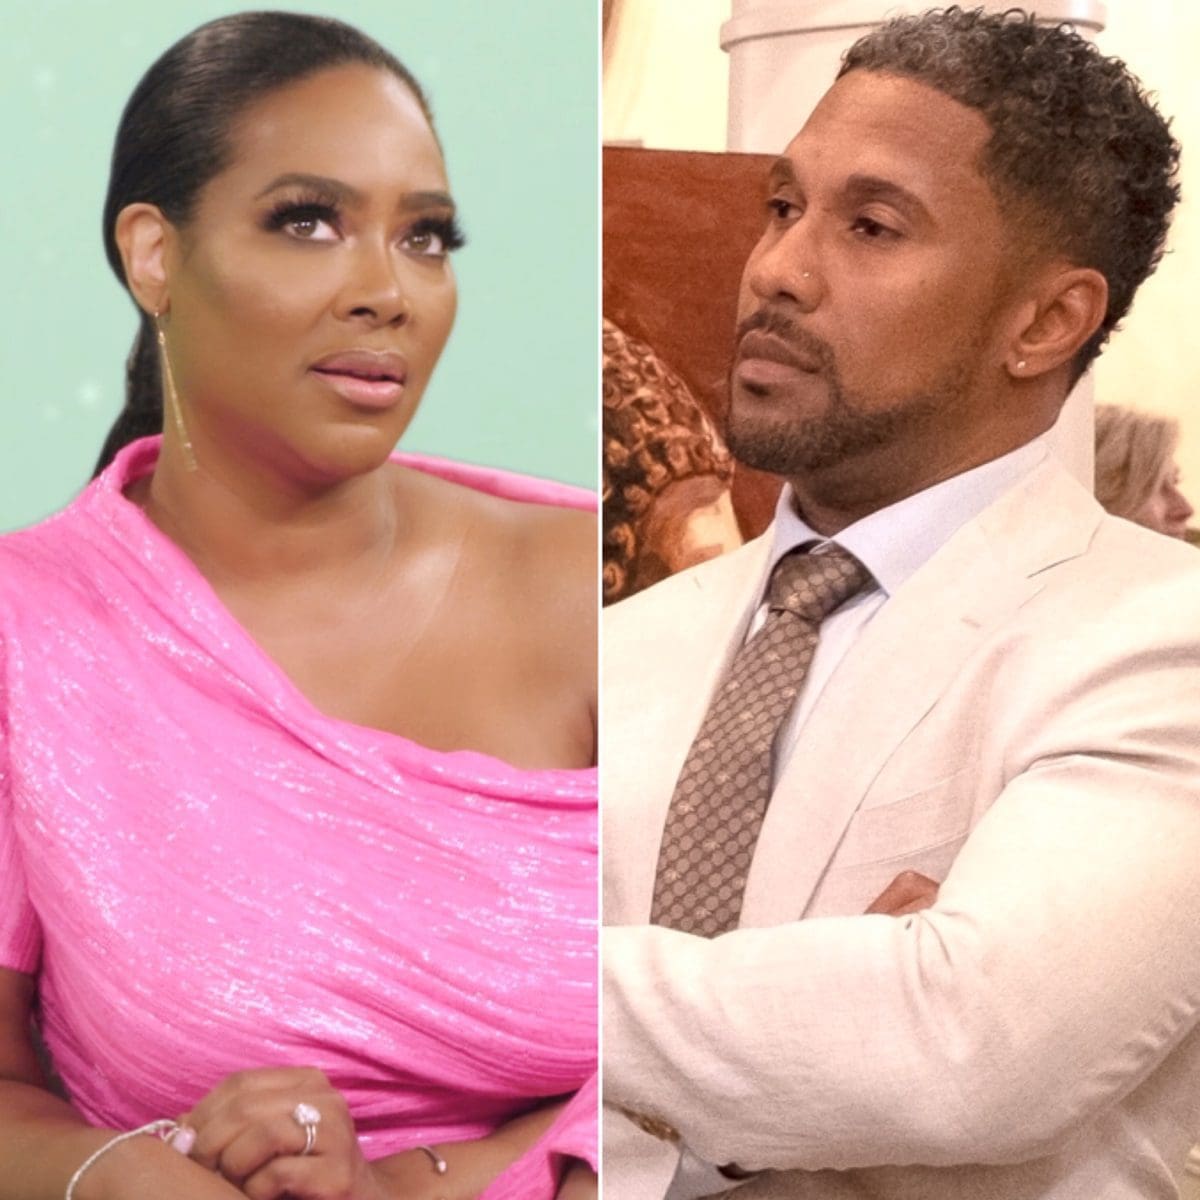 Reality TV star Kenya Moore and her husband Marc Daly have sadly called it quits once again, following their recent attempt at reconciliation.